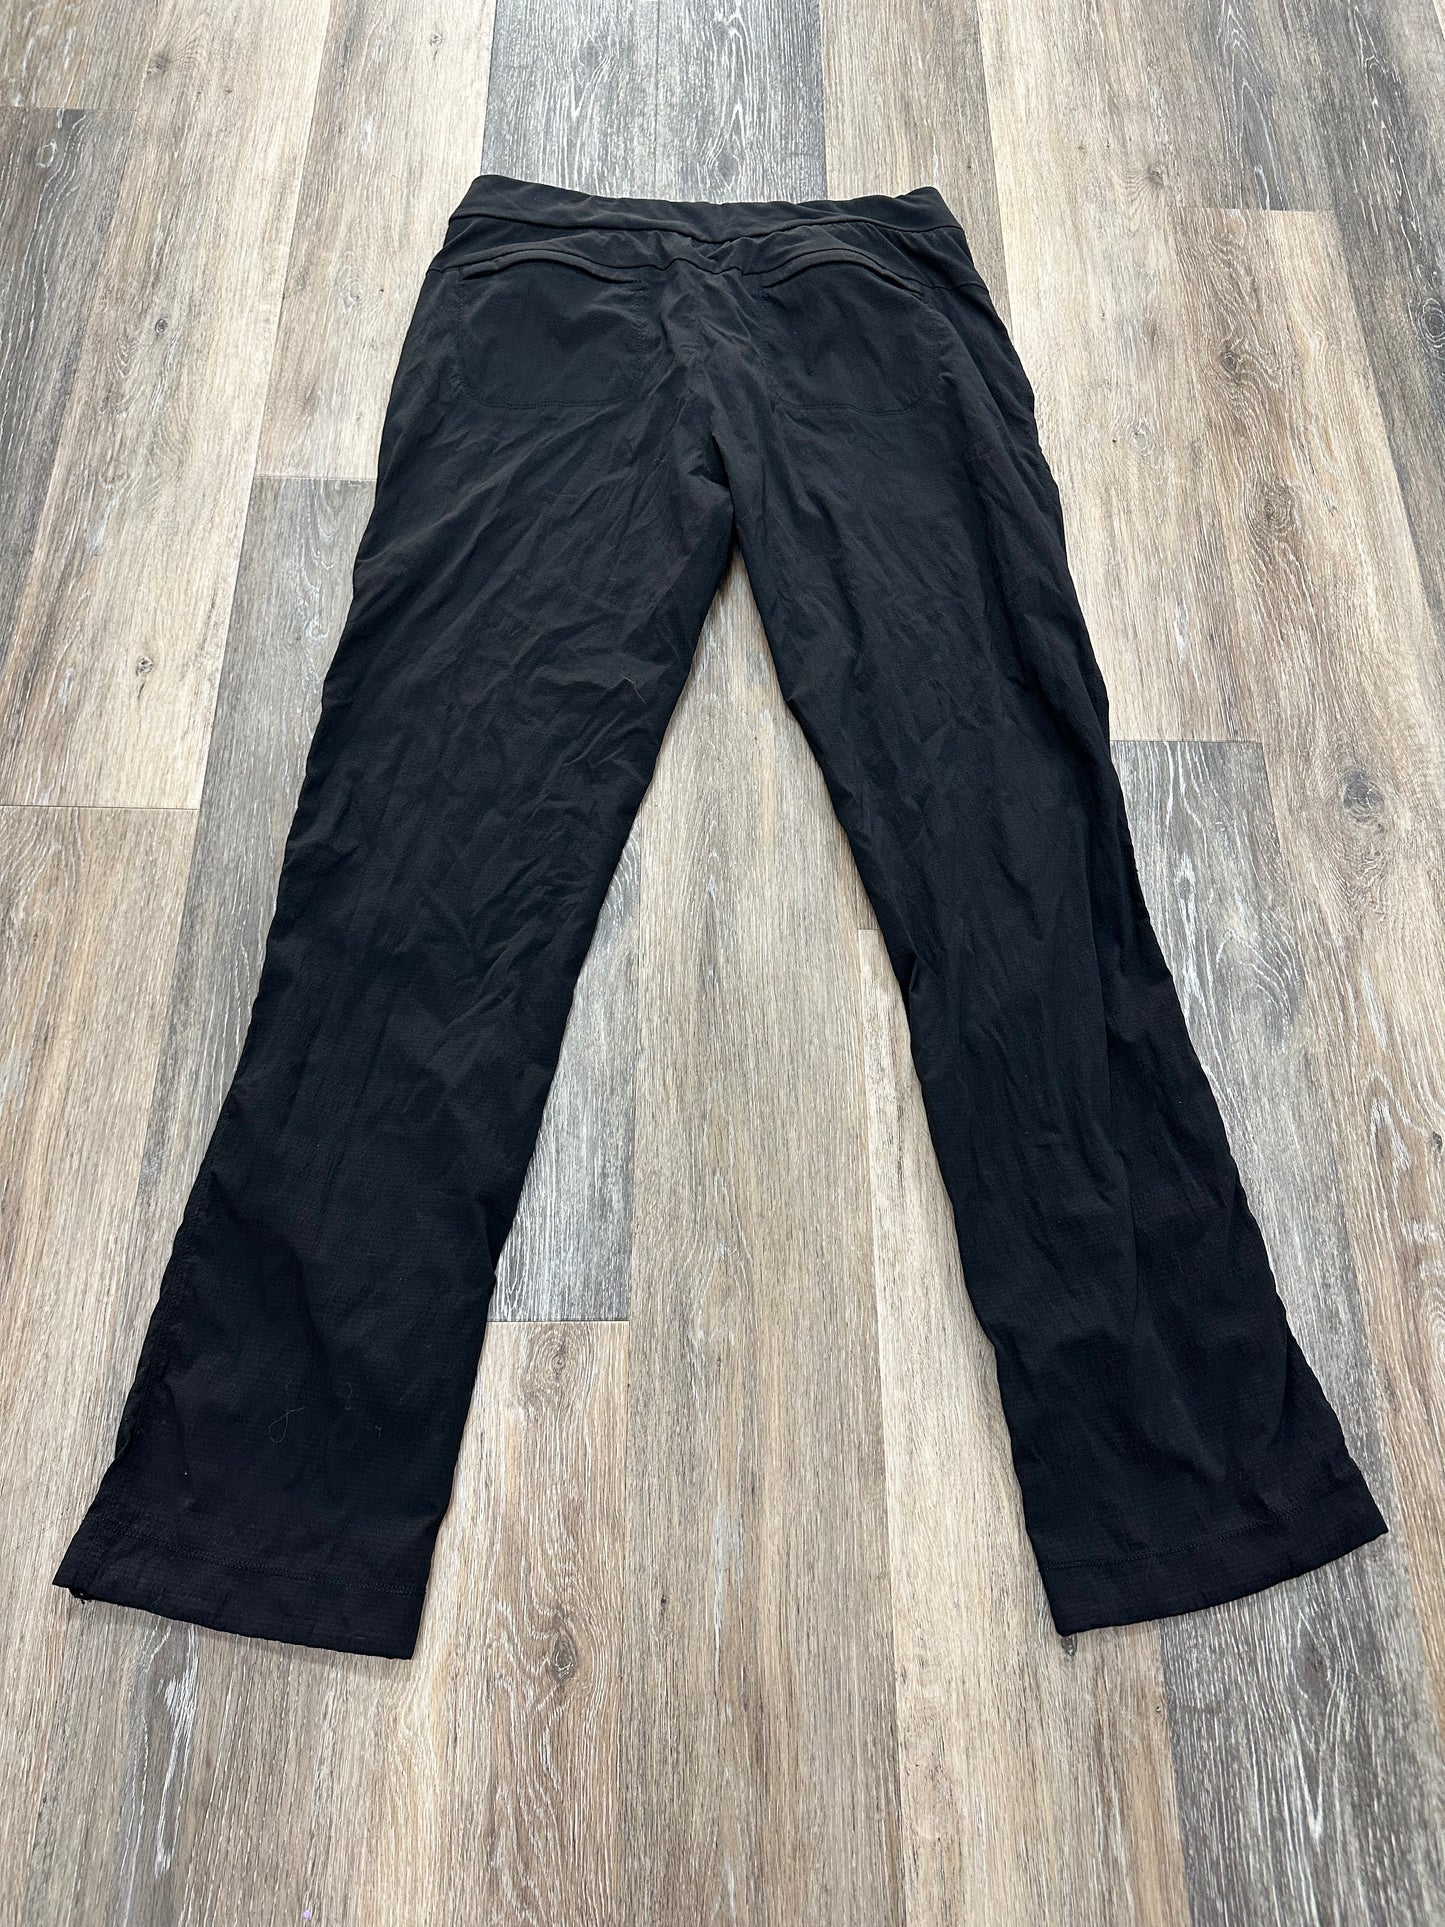 Athletic Pants By Athleta  Size: 14tall